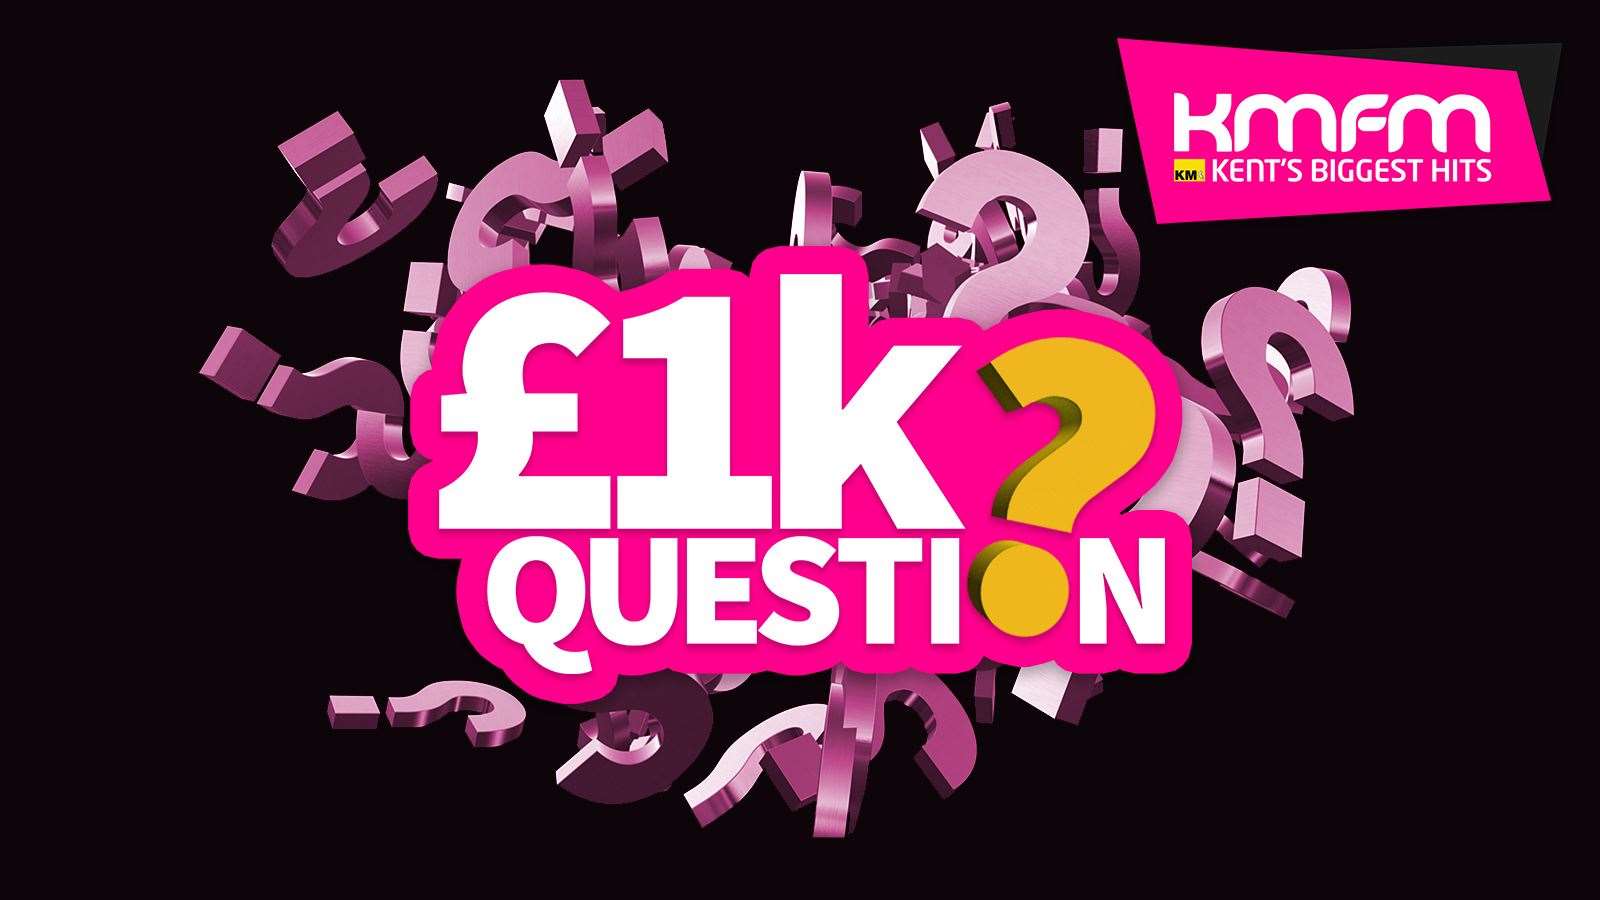 You could win the £1k Question on kmfm